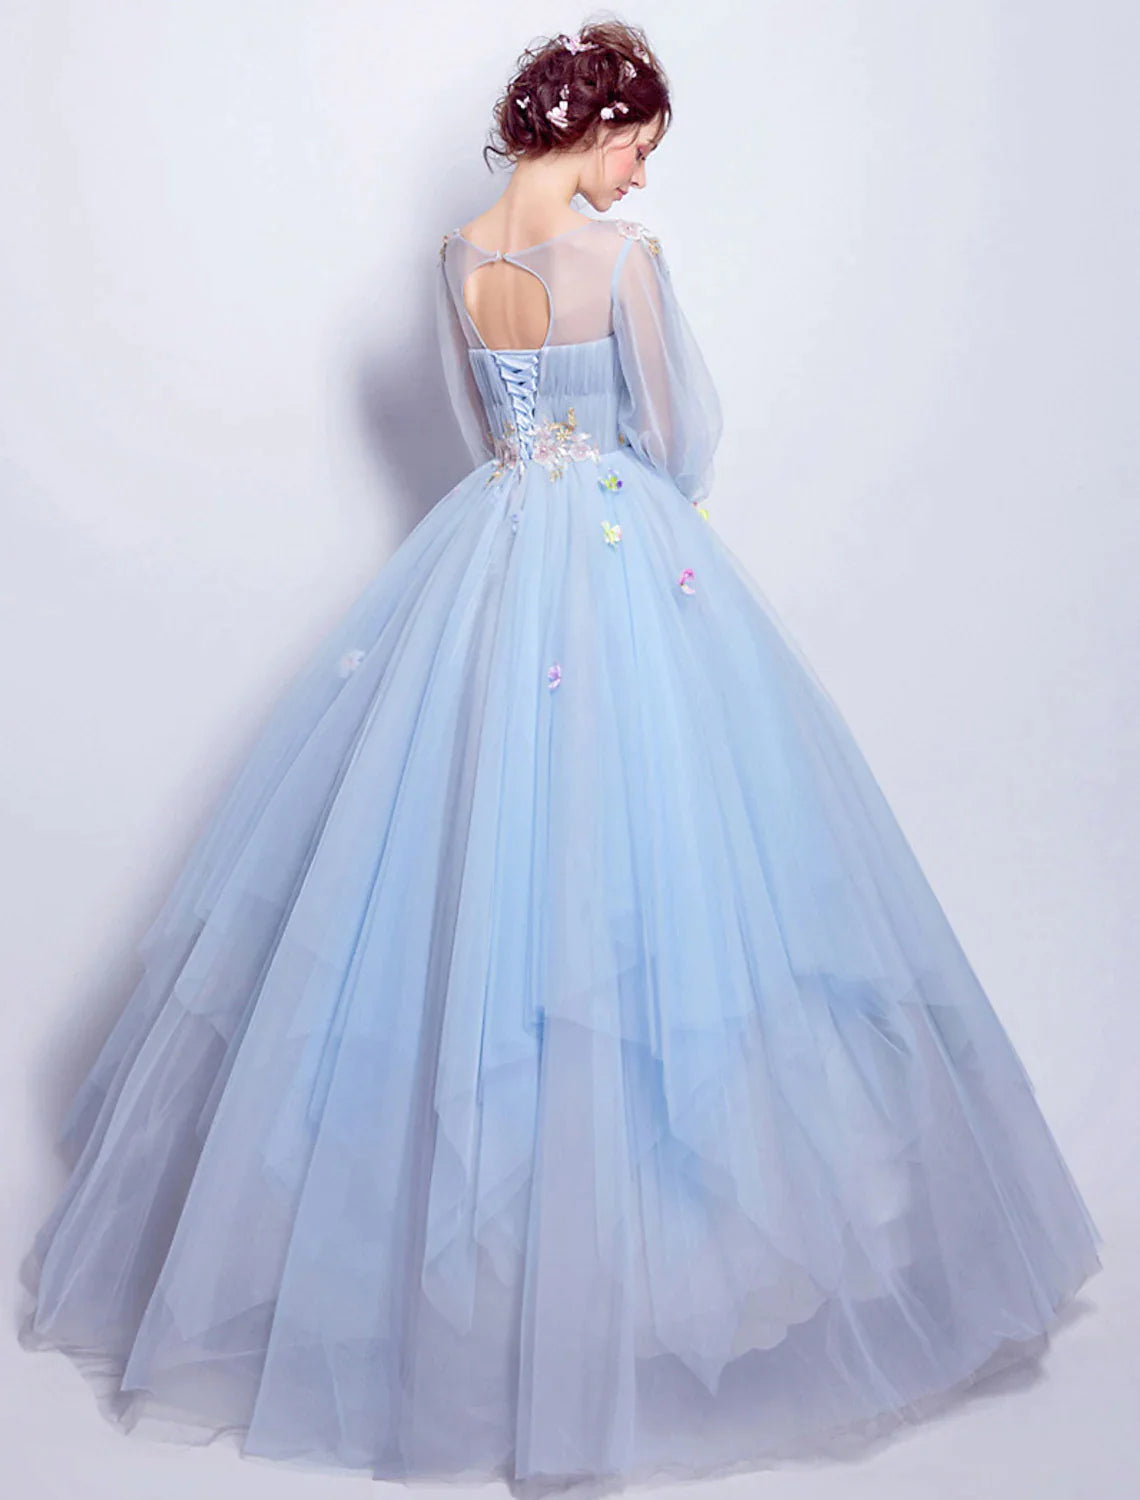 Elegant Floral Puffy Engagement Dress Neck Length SleeveFloor Length Tulle with Pleats Appliques